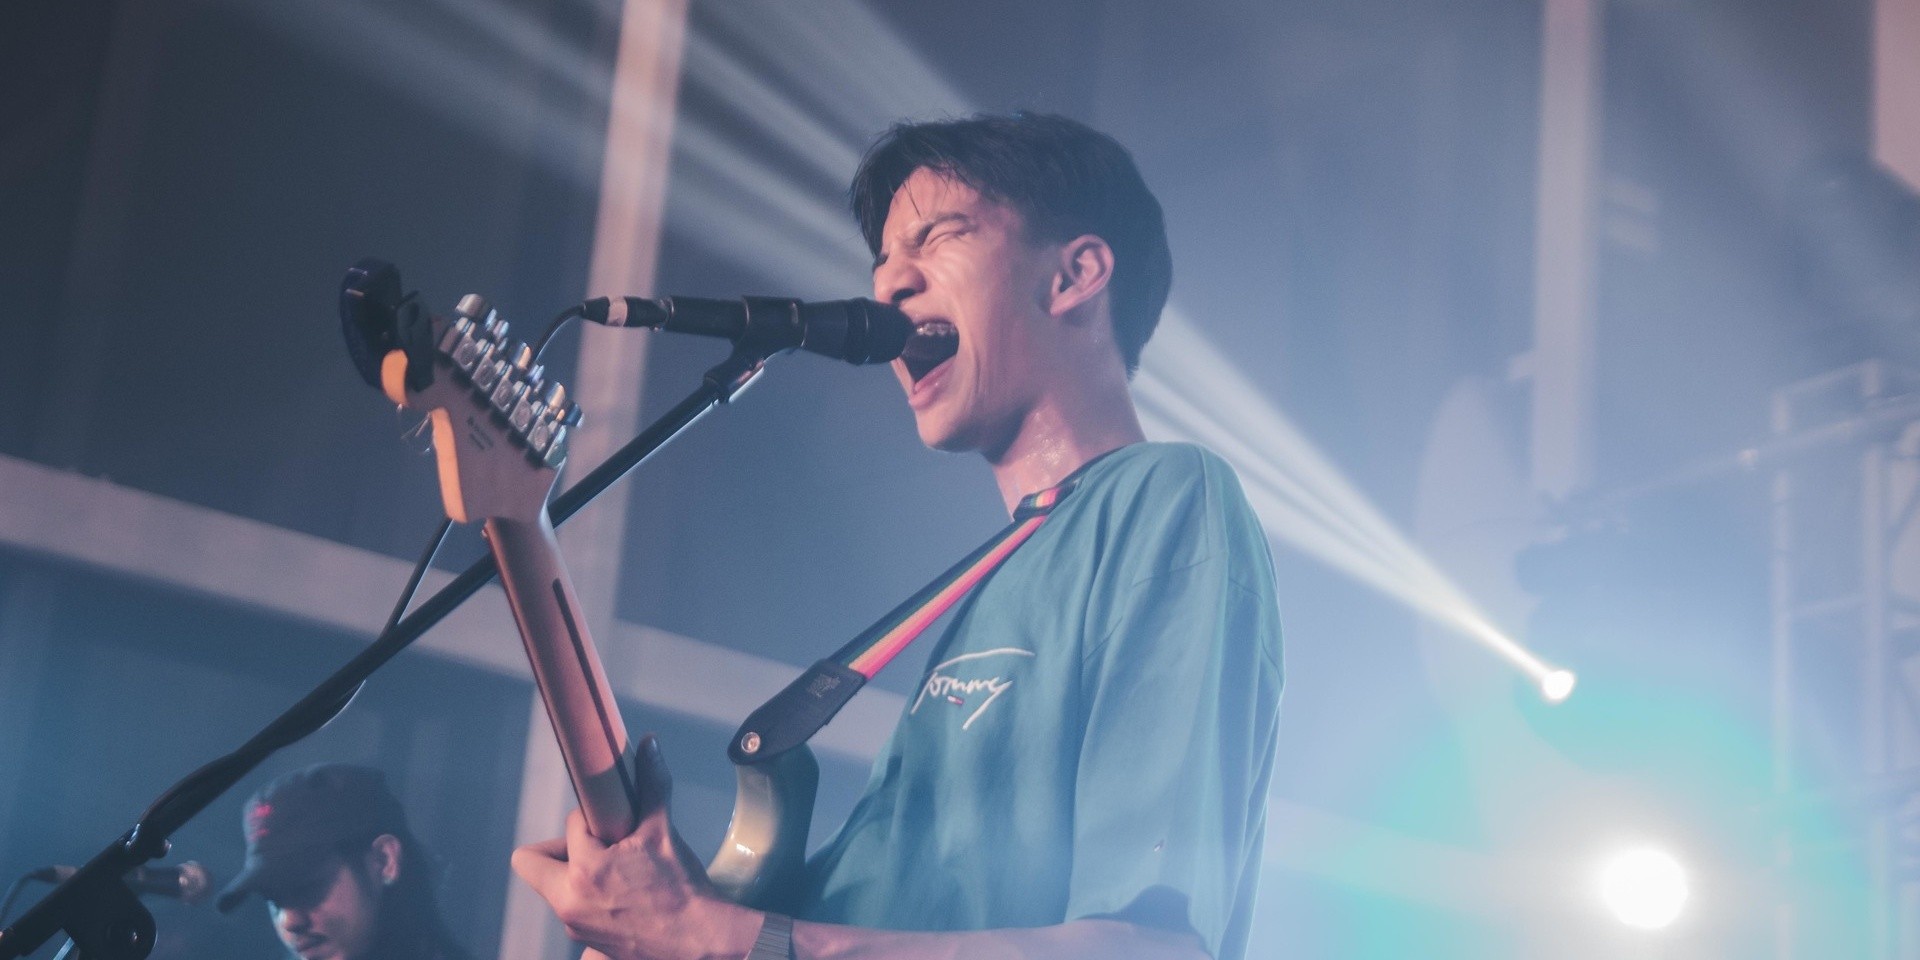 Phum Viphurit confronts his worries with new single 'Hello, Anxiety' – listen